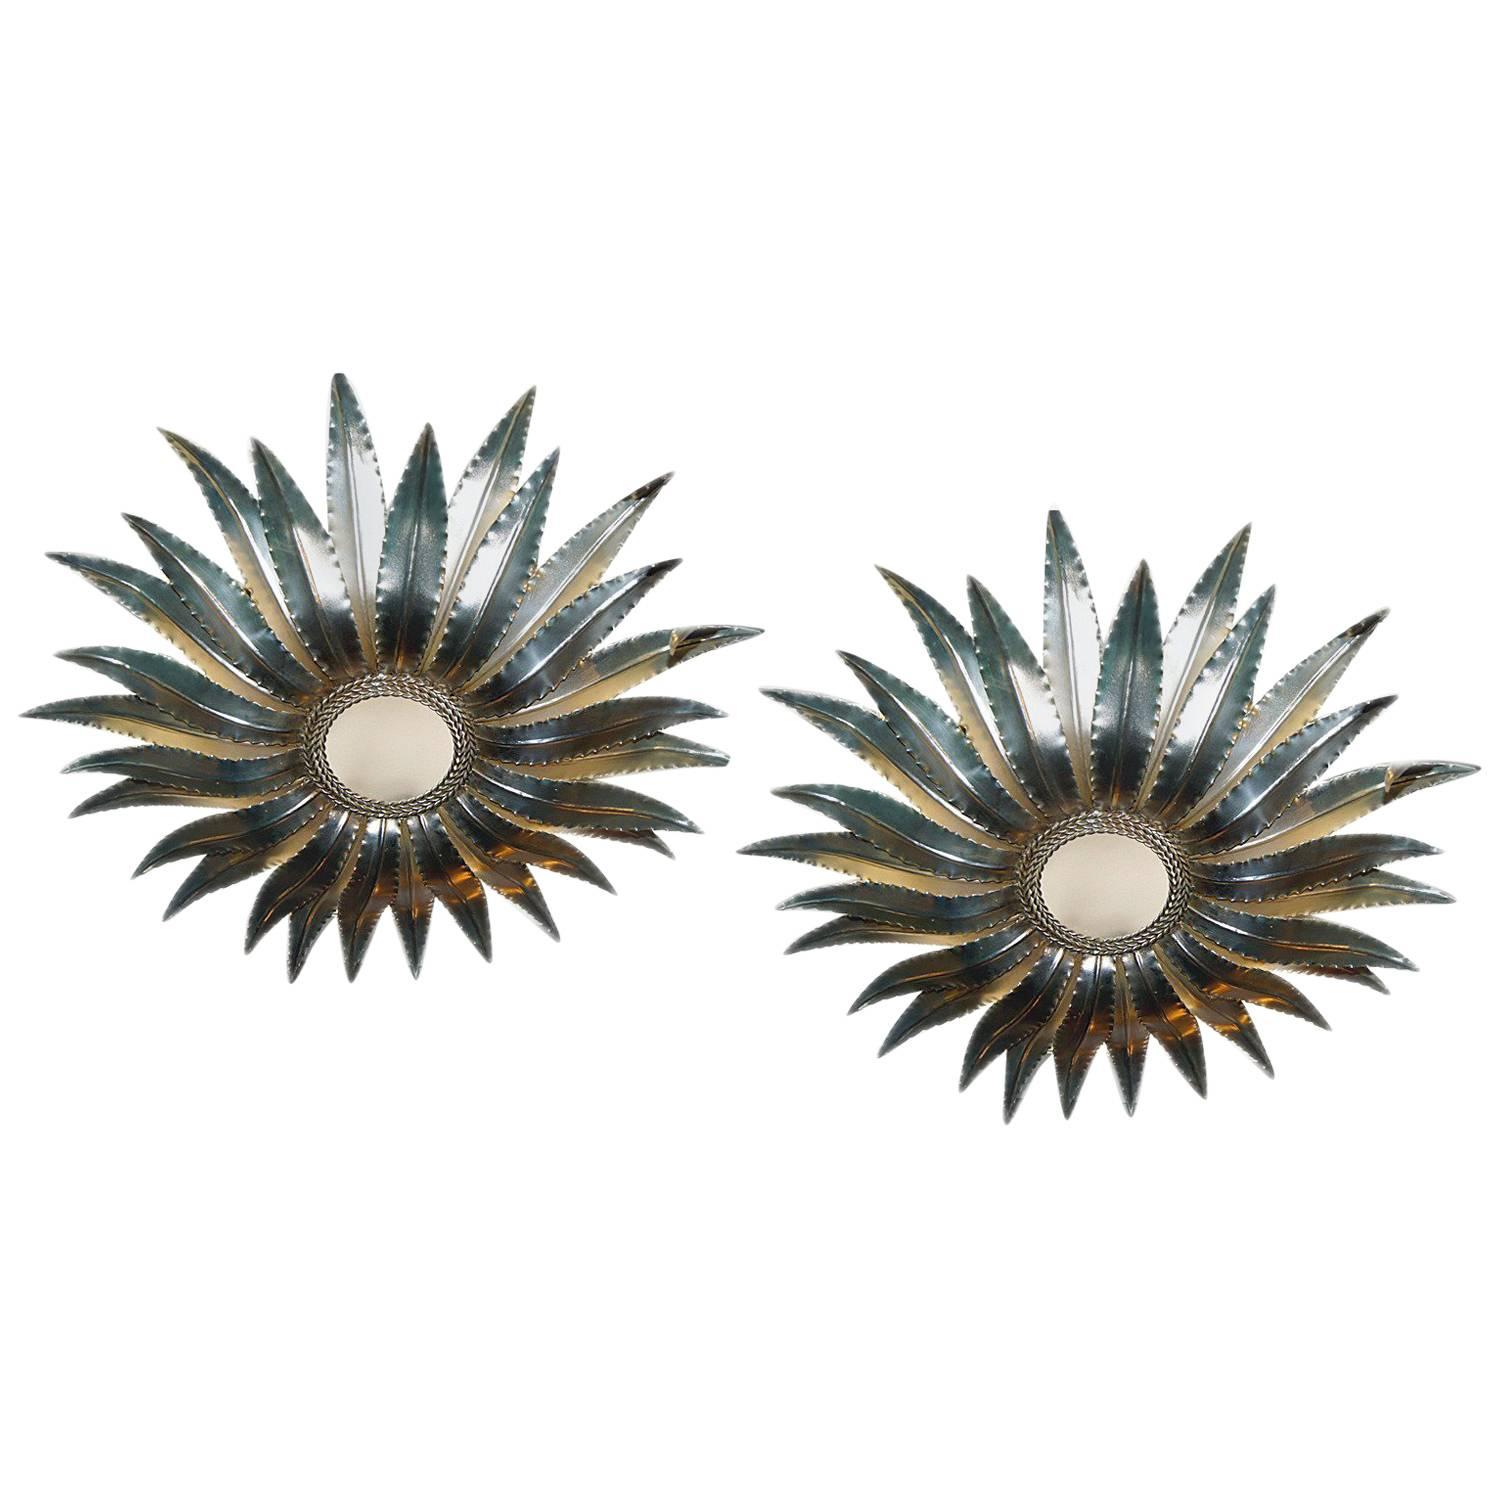 Pair of late circa 1940's Italian silver plated sunburst light fixtures with frosted glass insets. Sold Individually.

Measurements:
Drop: 7